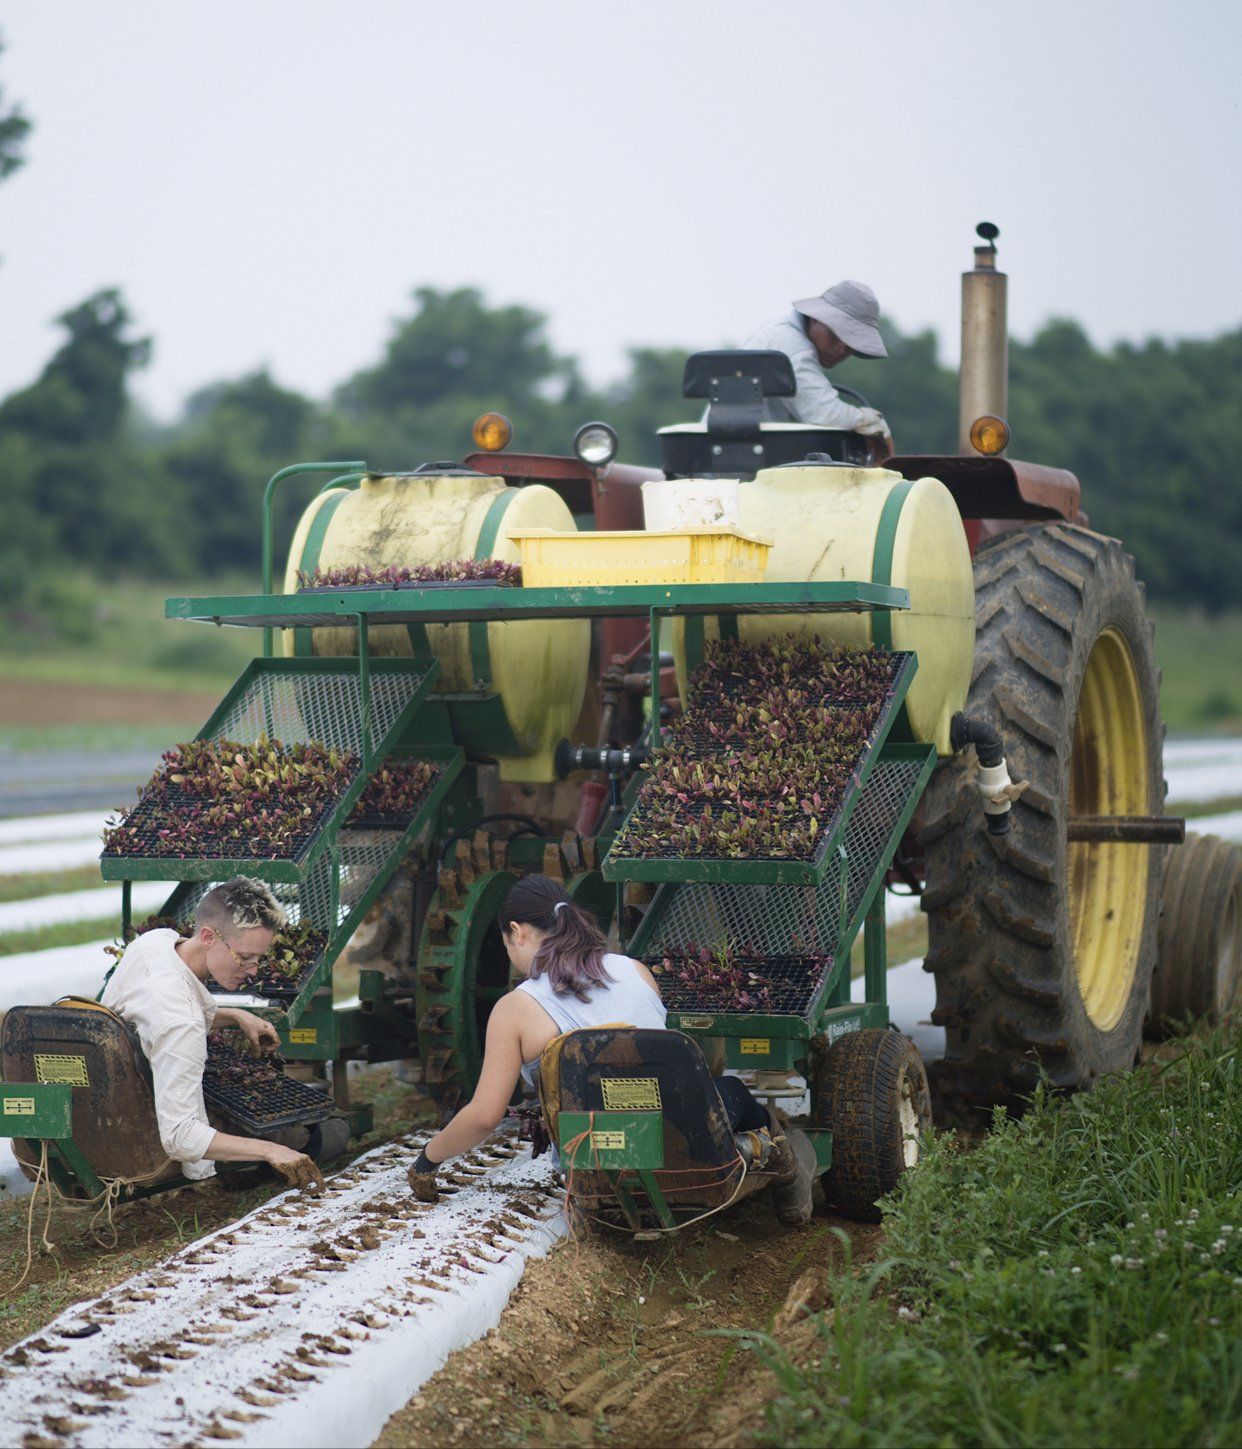 Next Happening: Farm Happenings for July 30, 2021